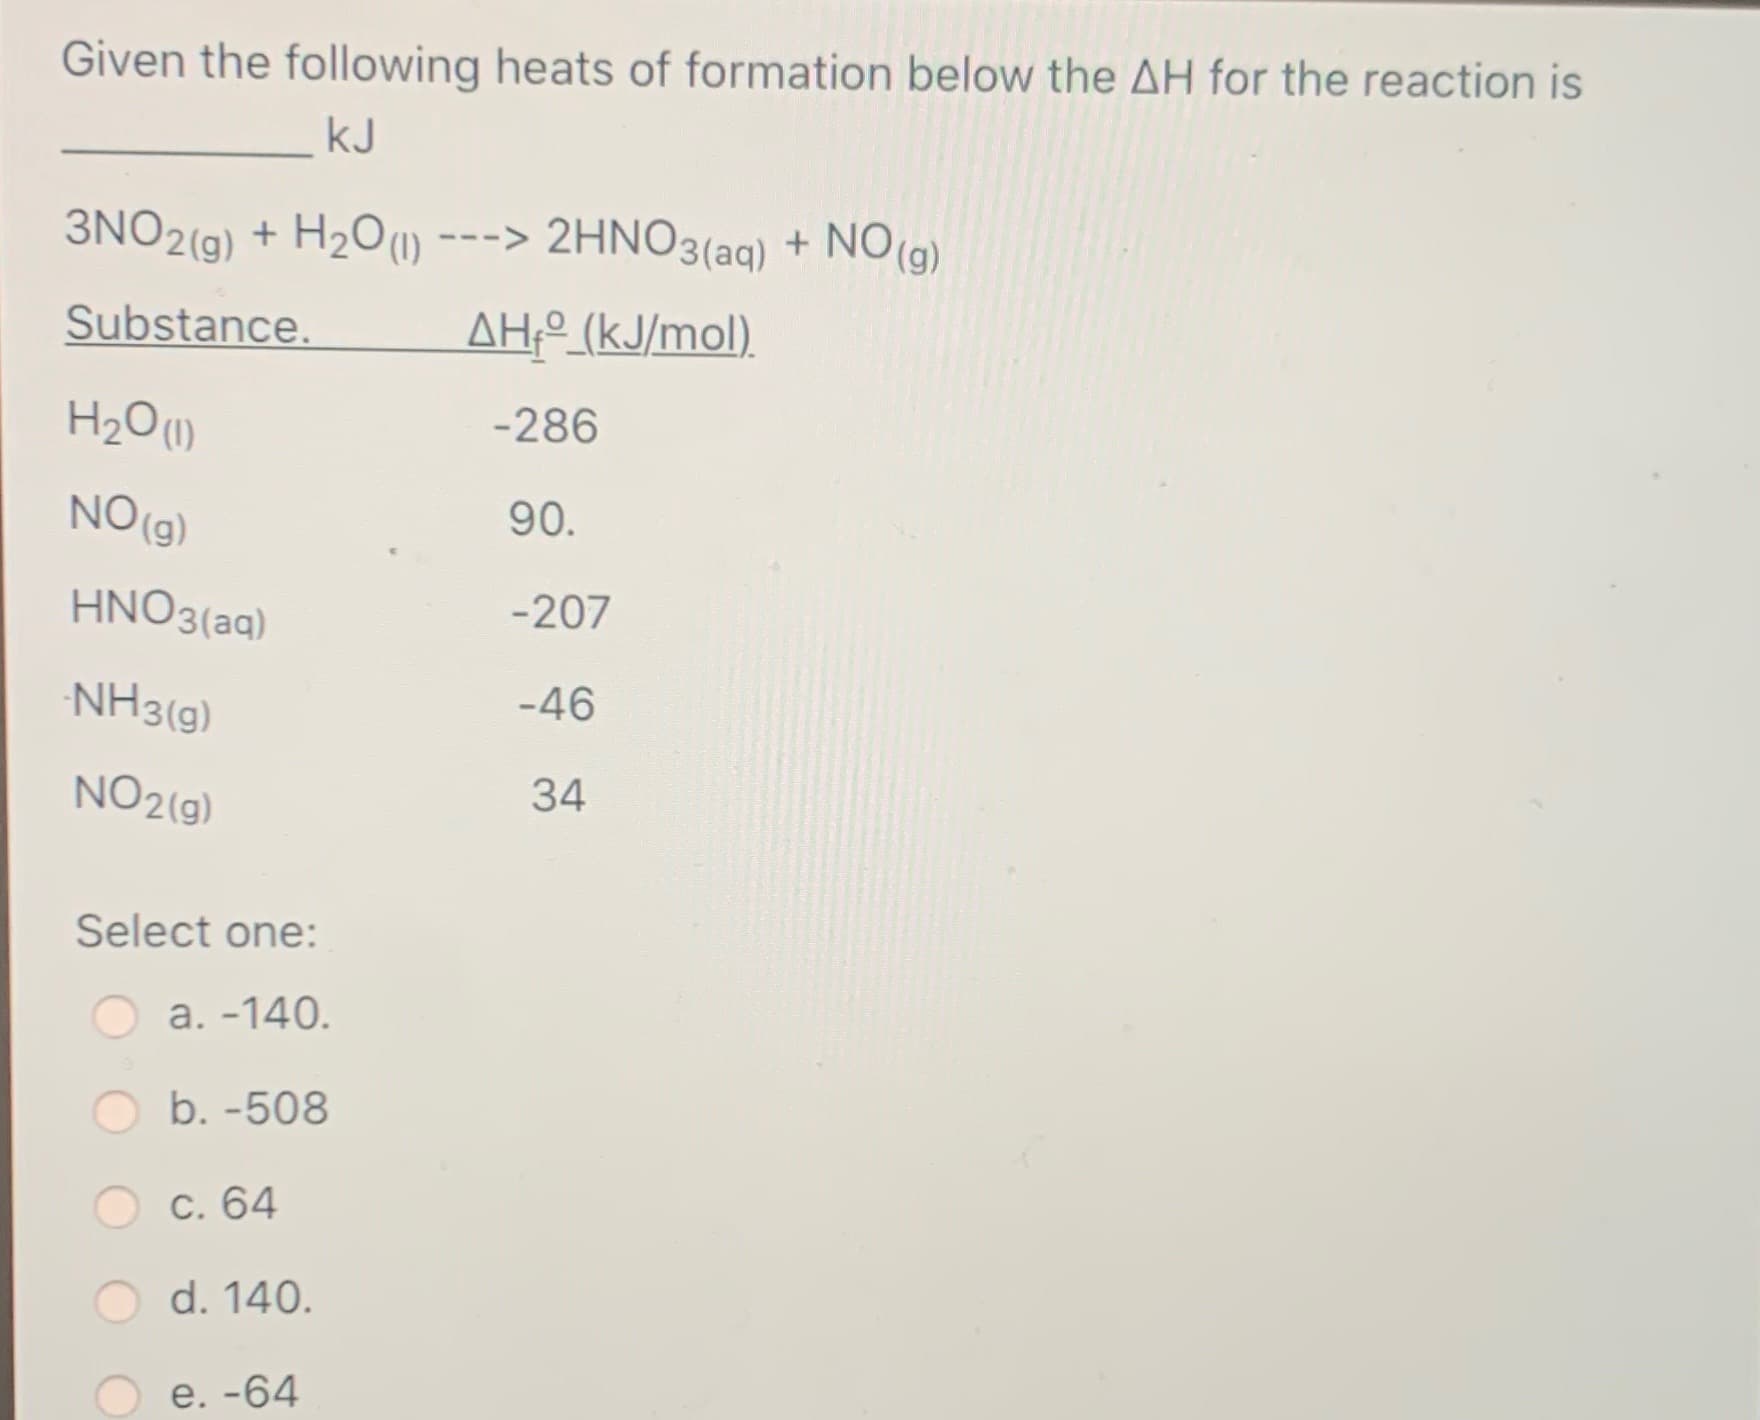 Given the following heats of formation below the AH for the reaction is
kJ
3NO2(g) + H2O(1)
--> 2HNO3(aq) +
NO (g)
Substance.
AH;º (kJ/mol).
H2O1)
-286
NO (g)
90.
HNO3(aq)
-207
NH3(9)
-46
NO2(g)
34
Select one
a. -140.
b. -508
C. 64
d. 140.
-64
